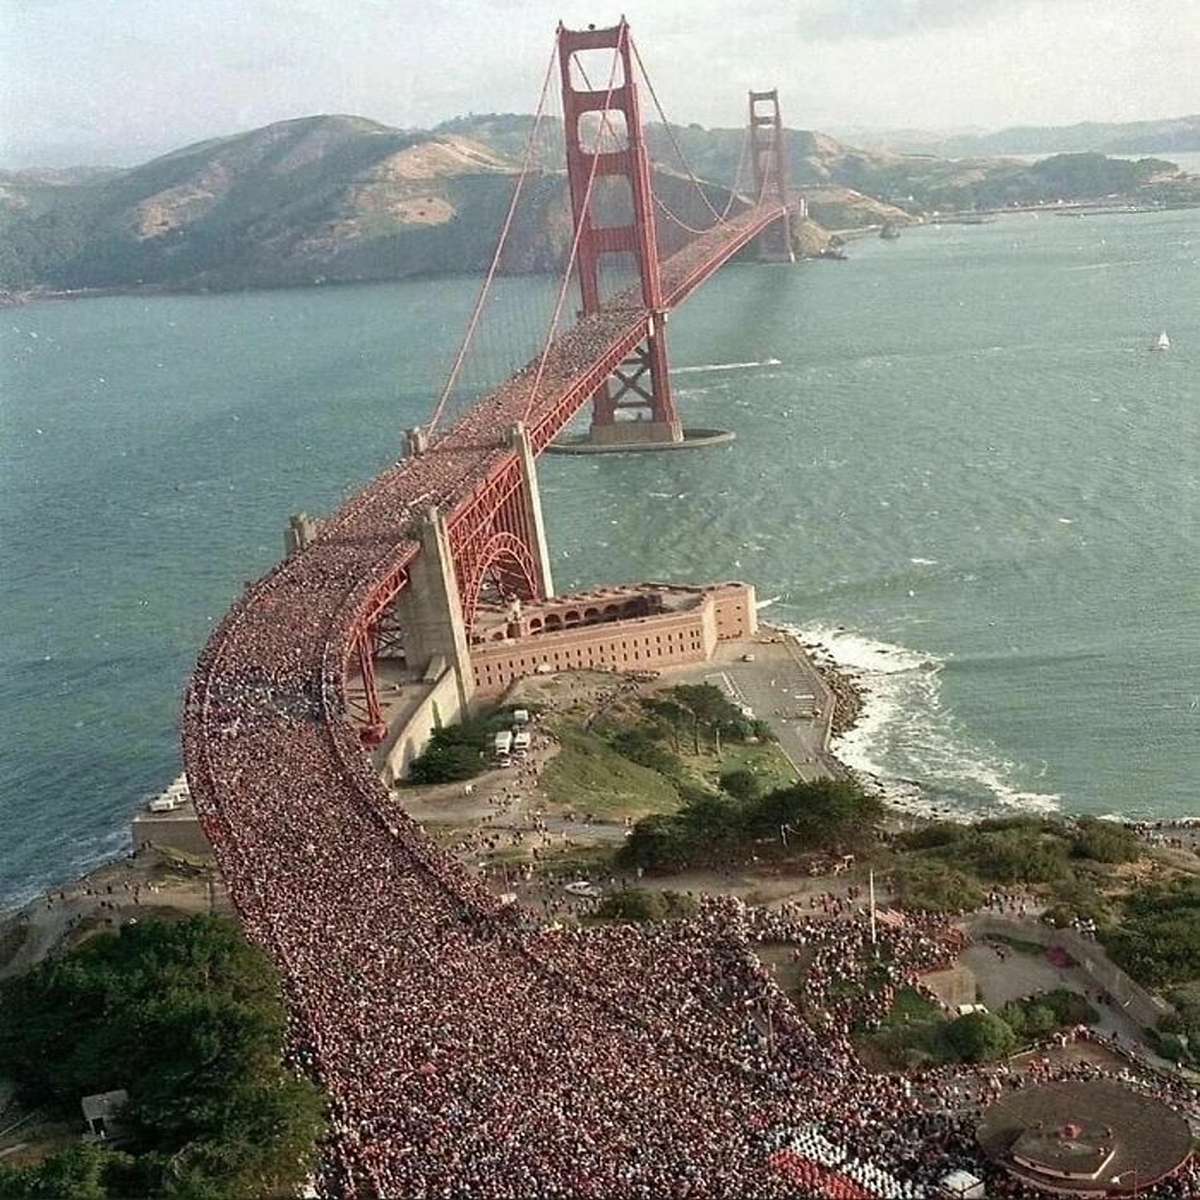 (1987) An Estimated 800,000 People Flocked To The Golden Gate Bridge In San Francisco, California For Its 50th Anniversary. The Weight Of The Large Crowd Caused The Bridge To Sag 7 Feet, Flattening Its Usual Convex Shape